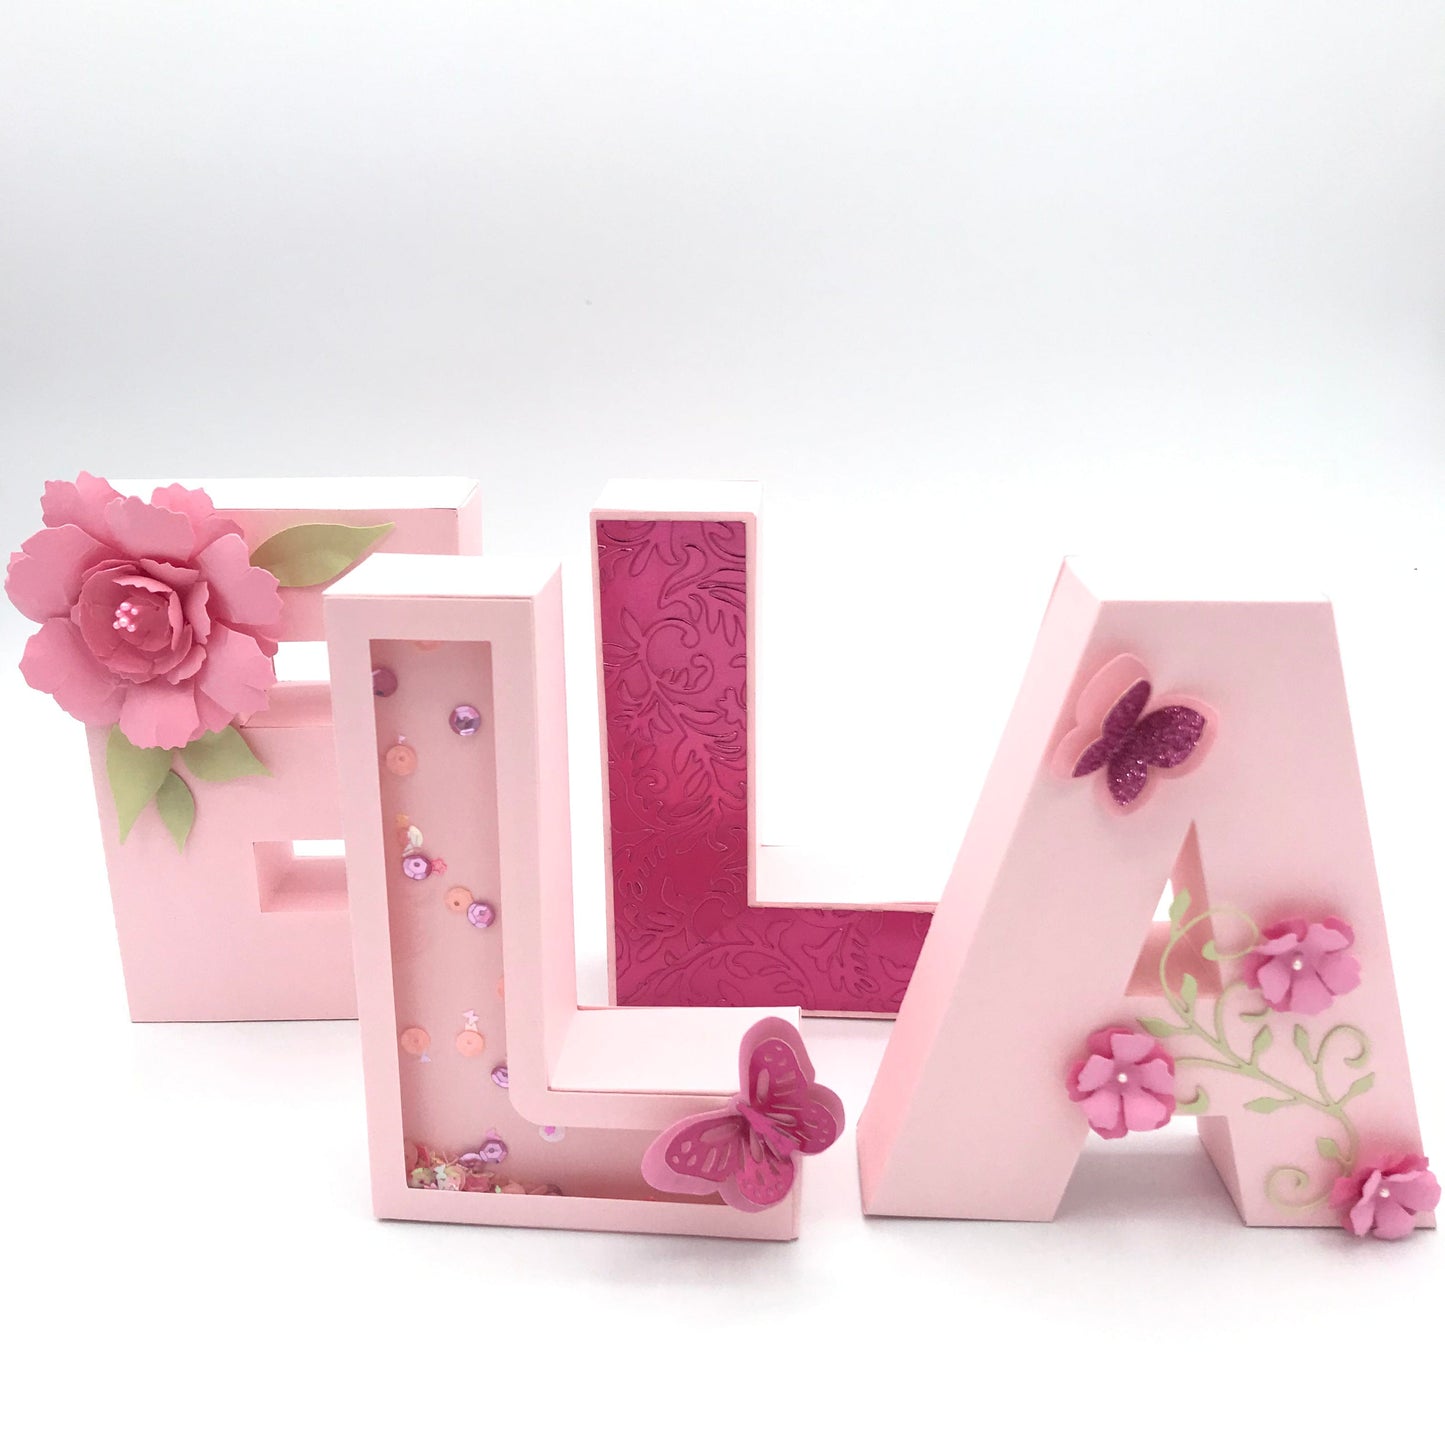 Adriana Ortiz Designs 3D letters 3D Letters for Personalized Decor. Handcrafted Eco-Friendly Paper Art